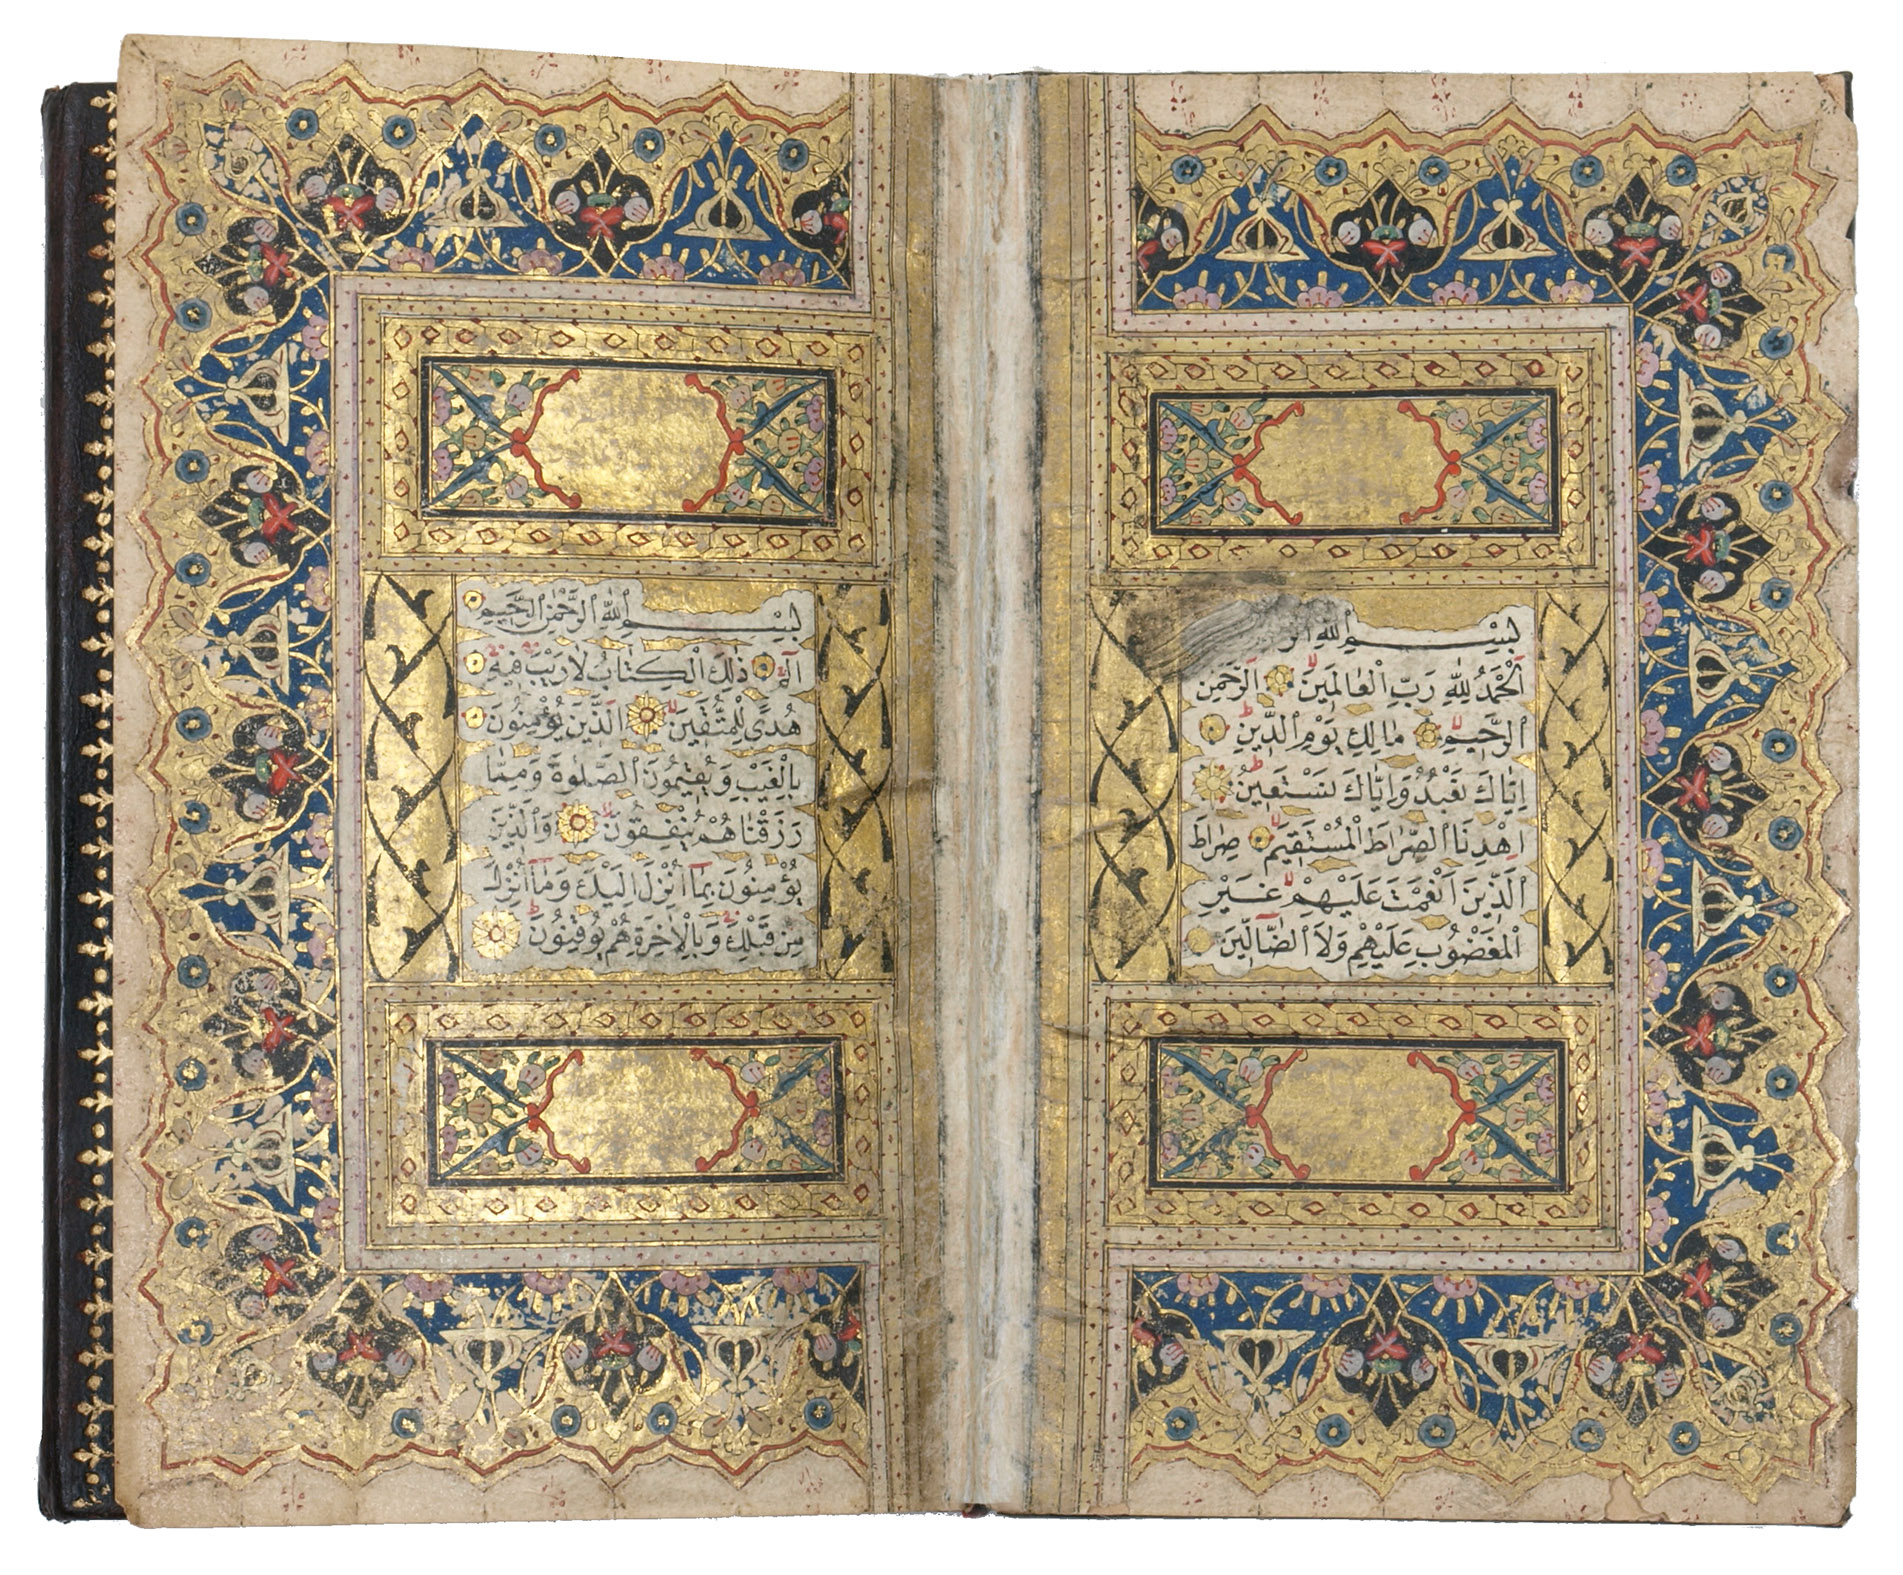 [MANUSCRIPT - QURAN]. - [A splendid illuminated Quran manuscript].Iran, AH 1204 [= 1783 AD]. 8vo (15 x 9 cm) Illuminated Arabic manuscript on paper, 19 lines per page, written in a neat naskh script in black ink with diacritics in red, margins ruled in gold and colours. Gold discs or florets between verses, sura headings written in white in gold cartouches flanked by panels with alternating floral motifs in gold and various colours. Brown morocco with a flap and gold-tooled borders and central ornaments.